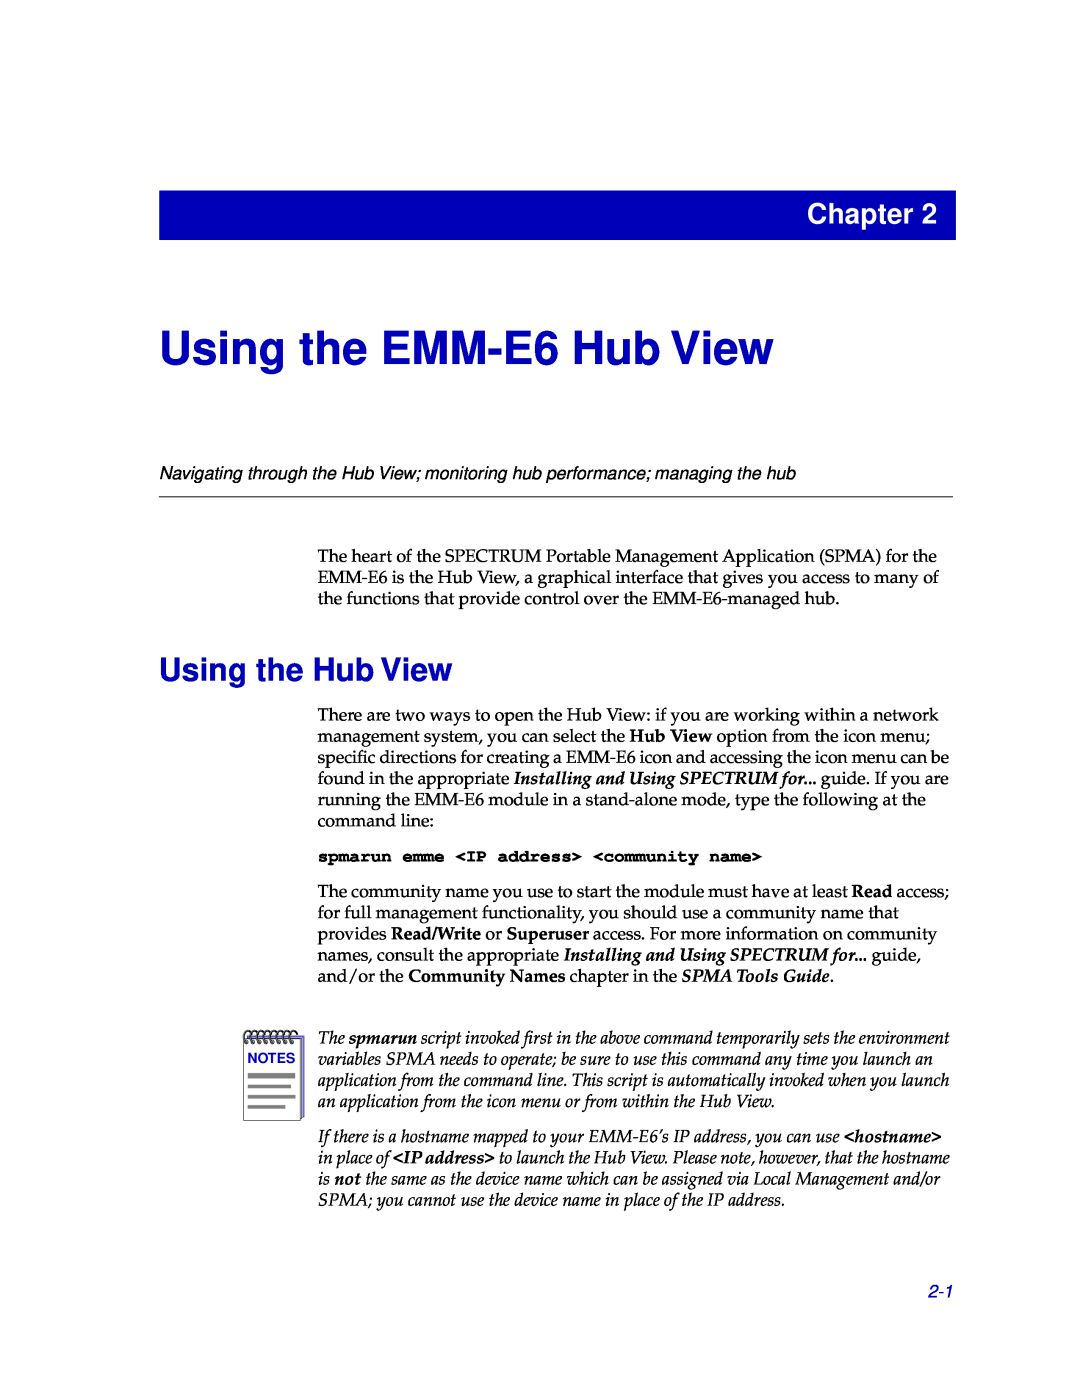 Cabletron Systems manual Using the EMM-E6 Hub View, Using the Hub View, spmarun emme IP address community name, Chapter 